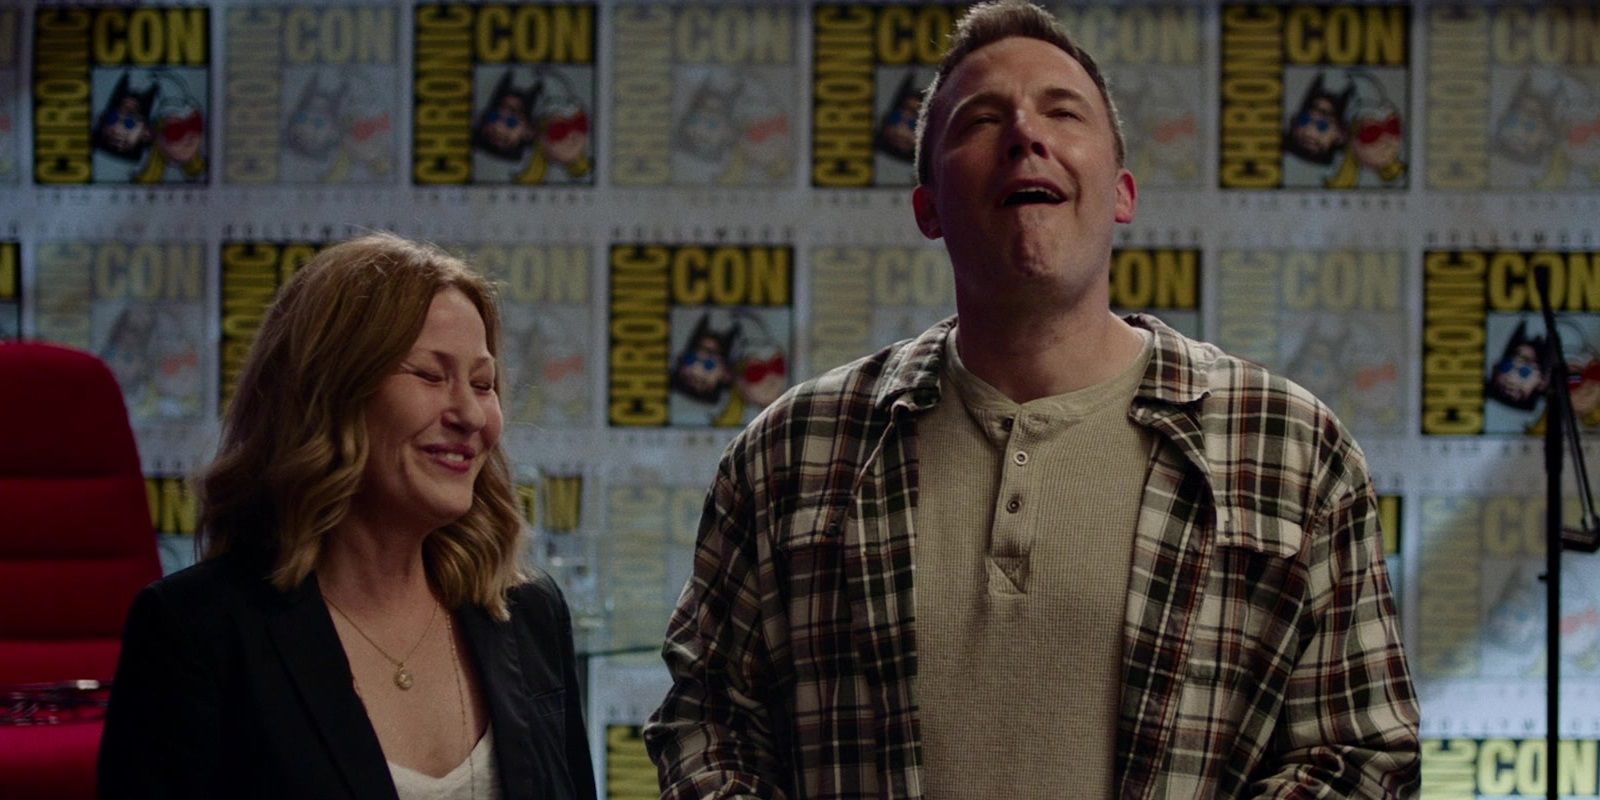 Ben Affleck and Joey Lauren Adams at Chronic-Con in Jay and Silent Bob Reboot